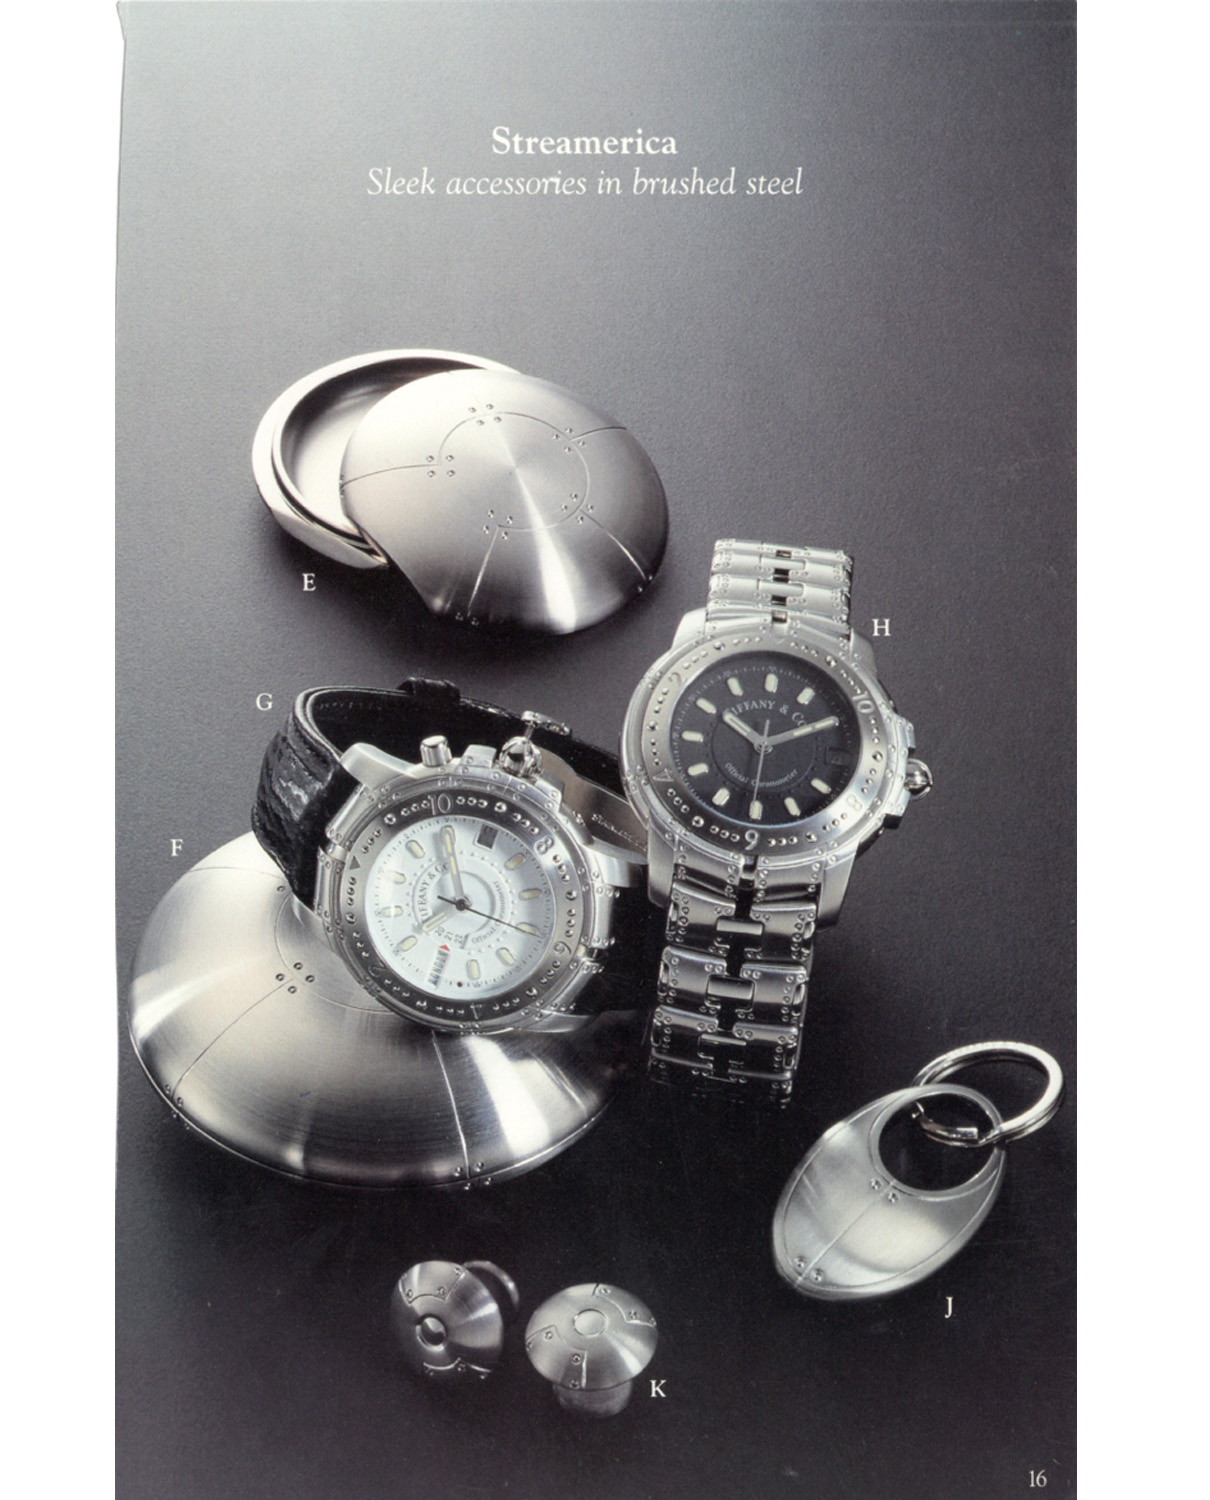 • Tiffany & Co. Blue Book Catalog 90's Sleek accessories in brushed steel Streamerica Perisphere Nesting Boxes, World Timer Automatic Watch Chronometer, geodome cufflinks, Curviline key ring.